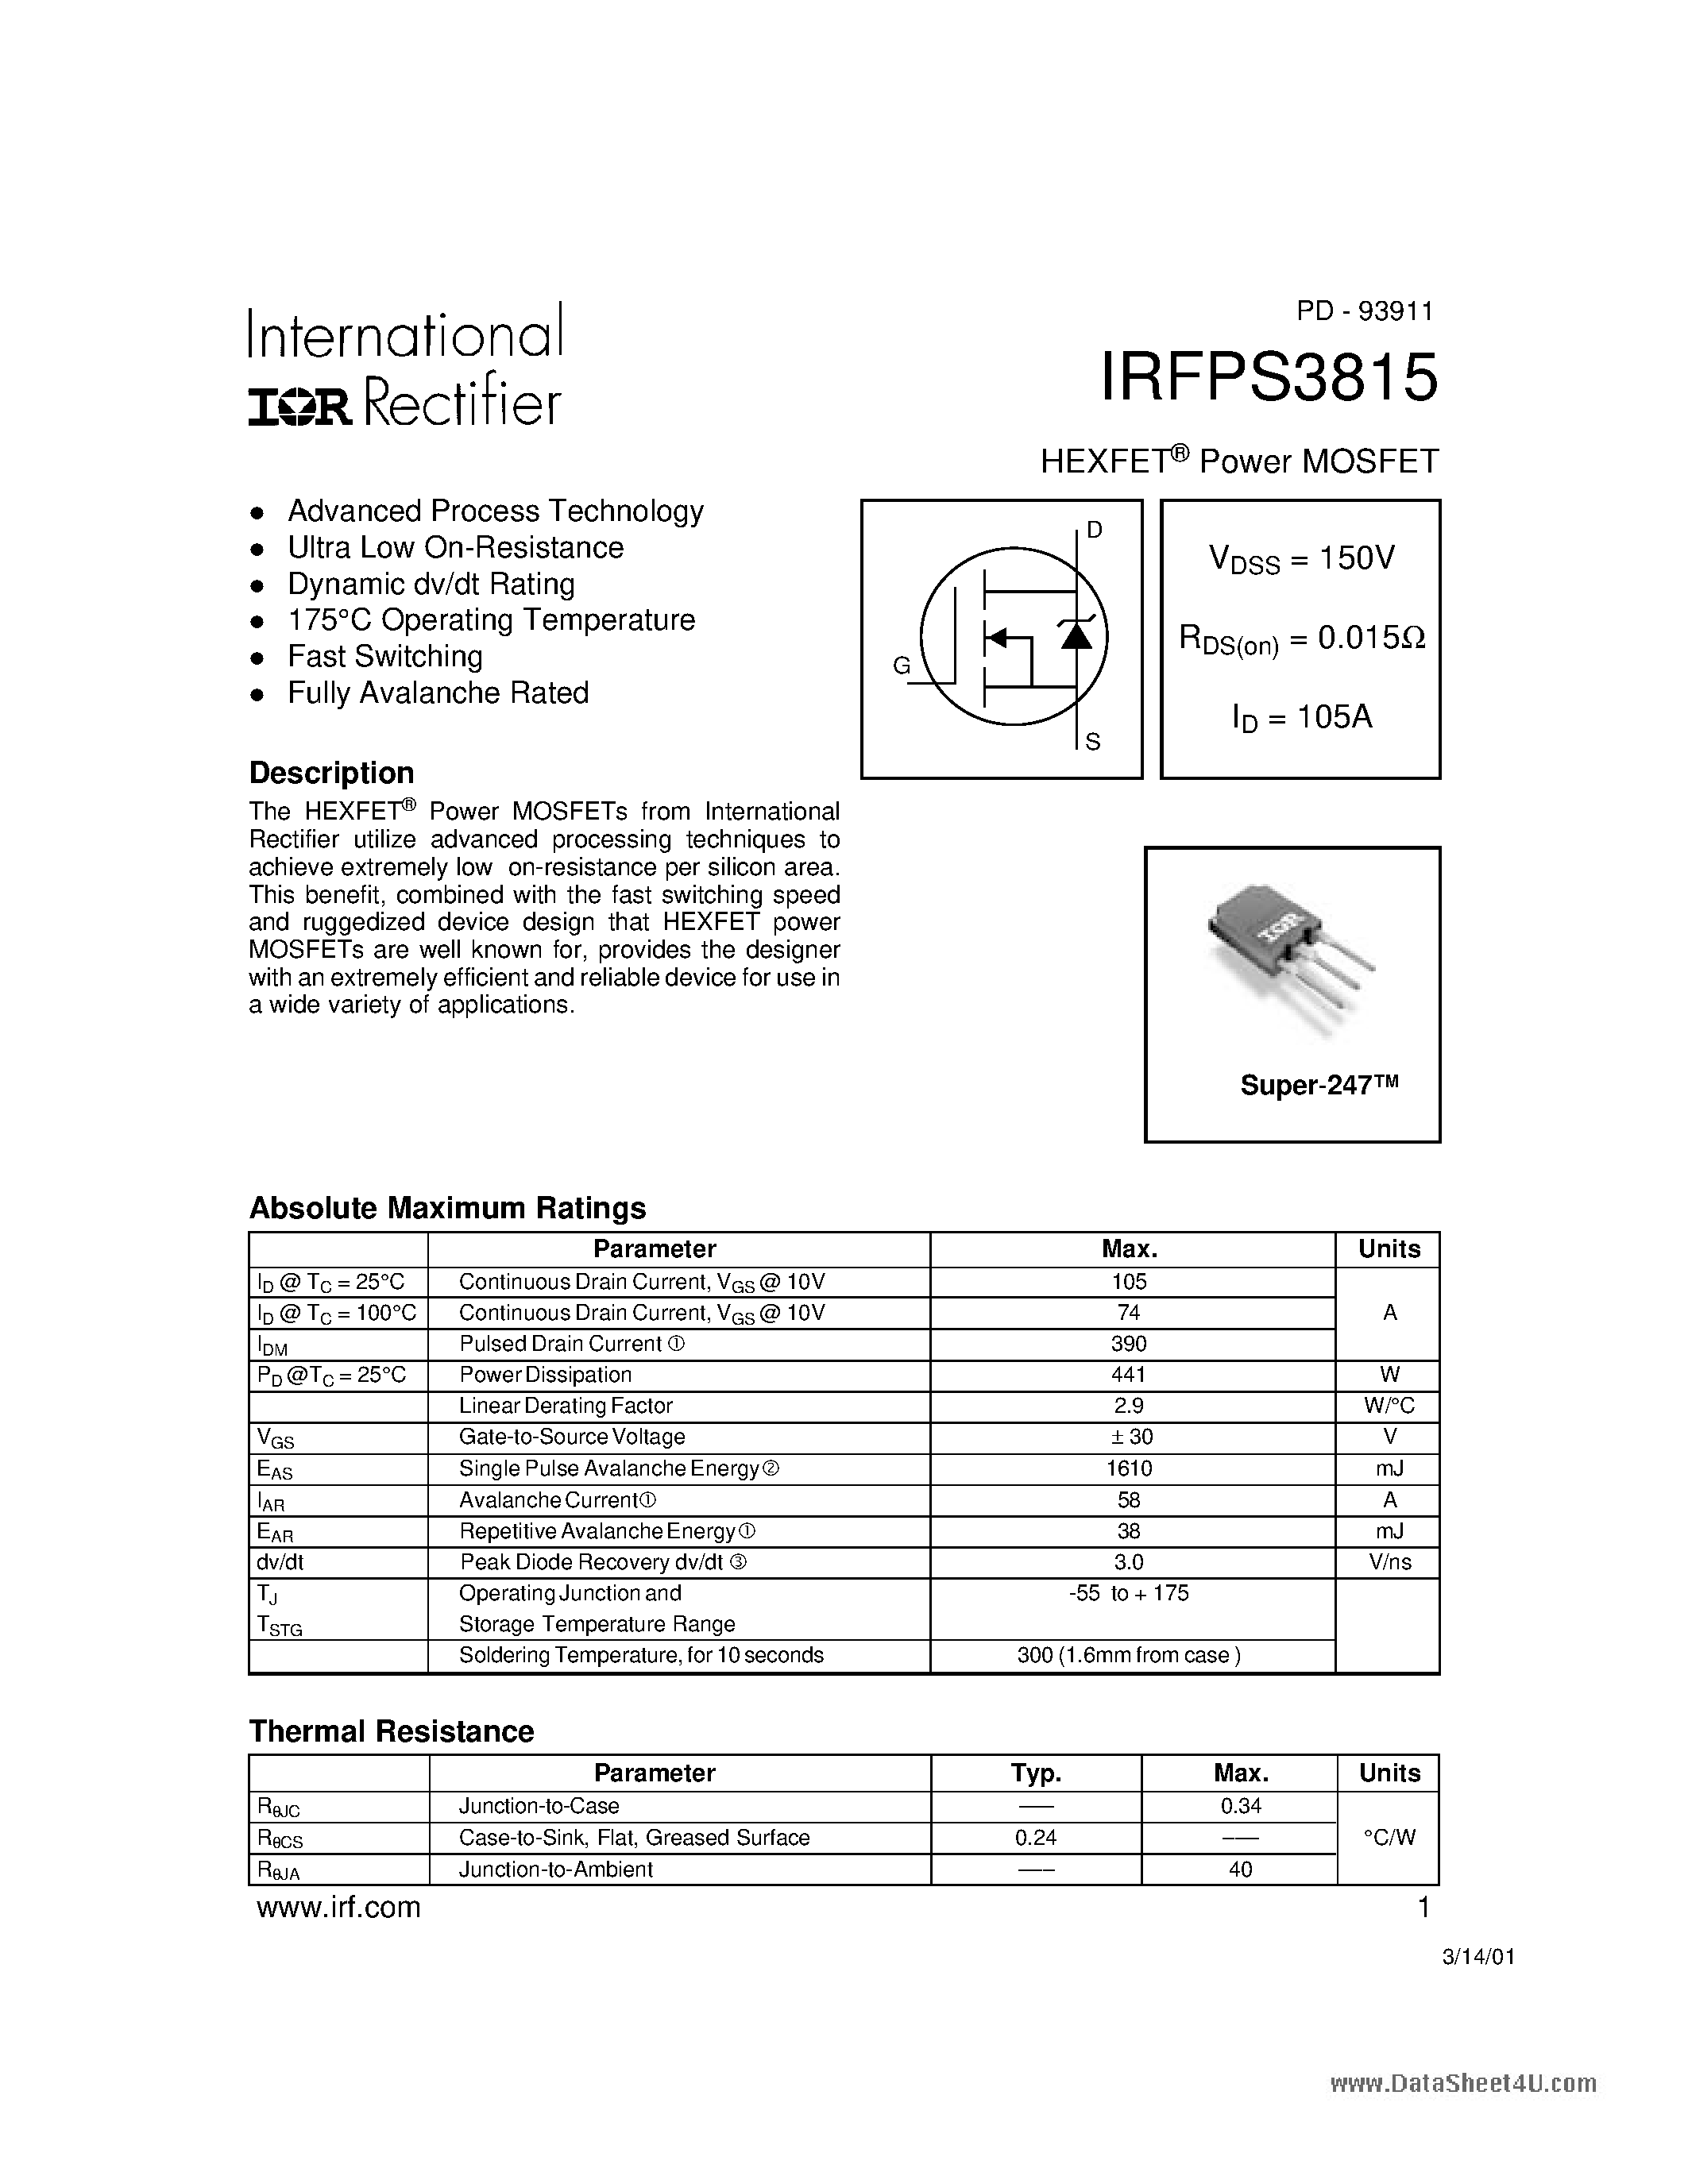 Даташит IRFPS3815 - HEXFET Power MOSFET страница 1